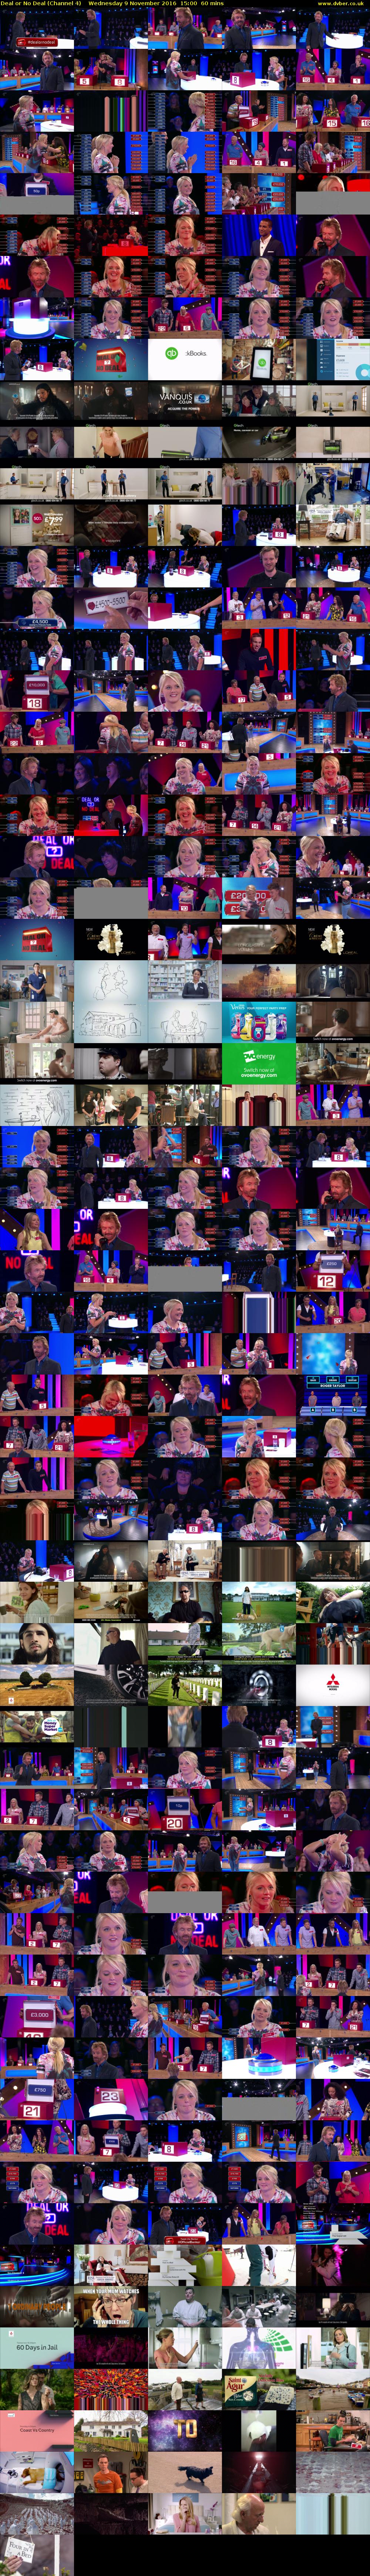 Deal or No Deal (Channel 4) Wednesday 9 November 2016 15:00 - 16:00